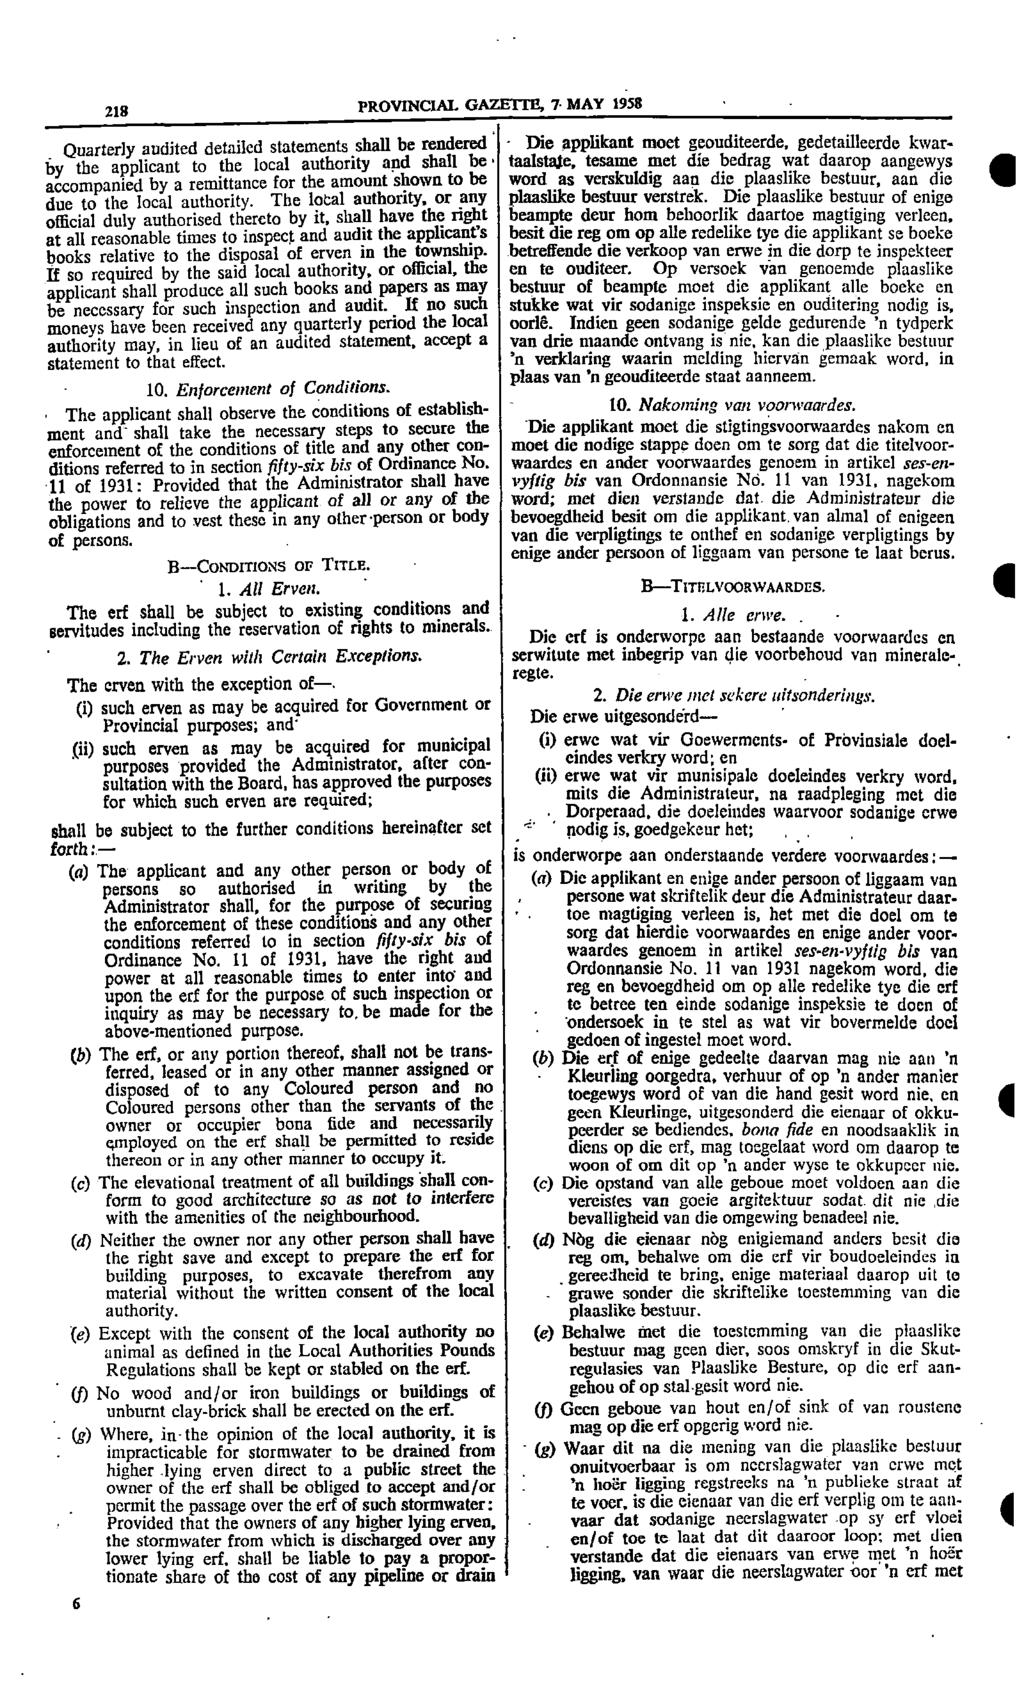 218 PROVNCAL GAZETTE 7 MAY 1993 Quarterly audited detailed statements shall be rendered Die applikant meet geouditeerde gedetailleerde kwarby the applicant to the local authority and shall be